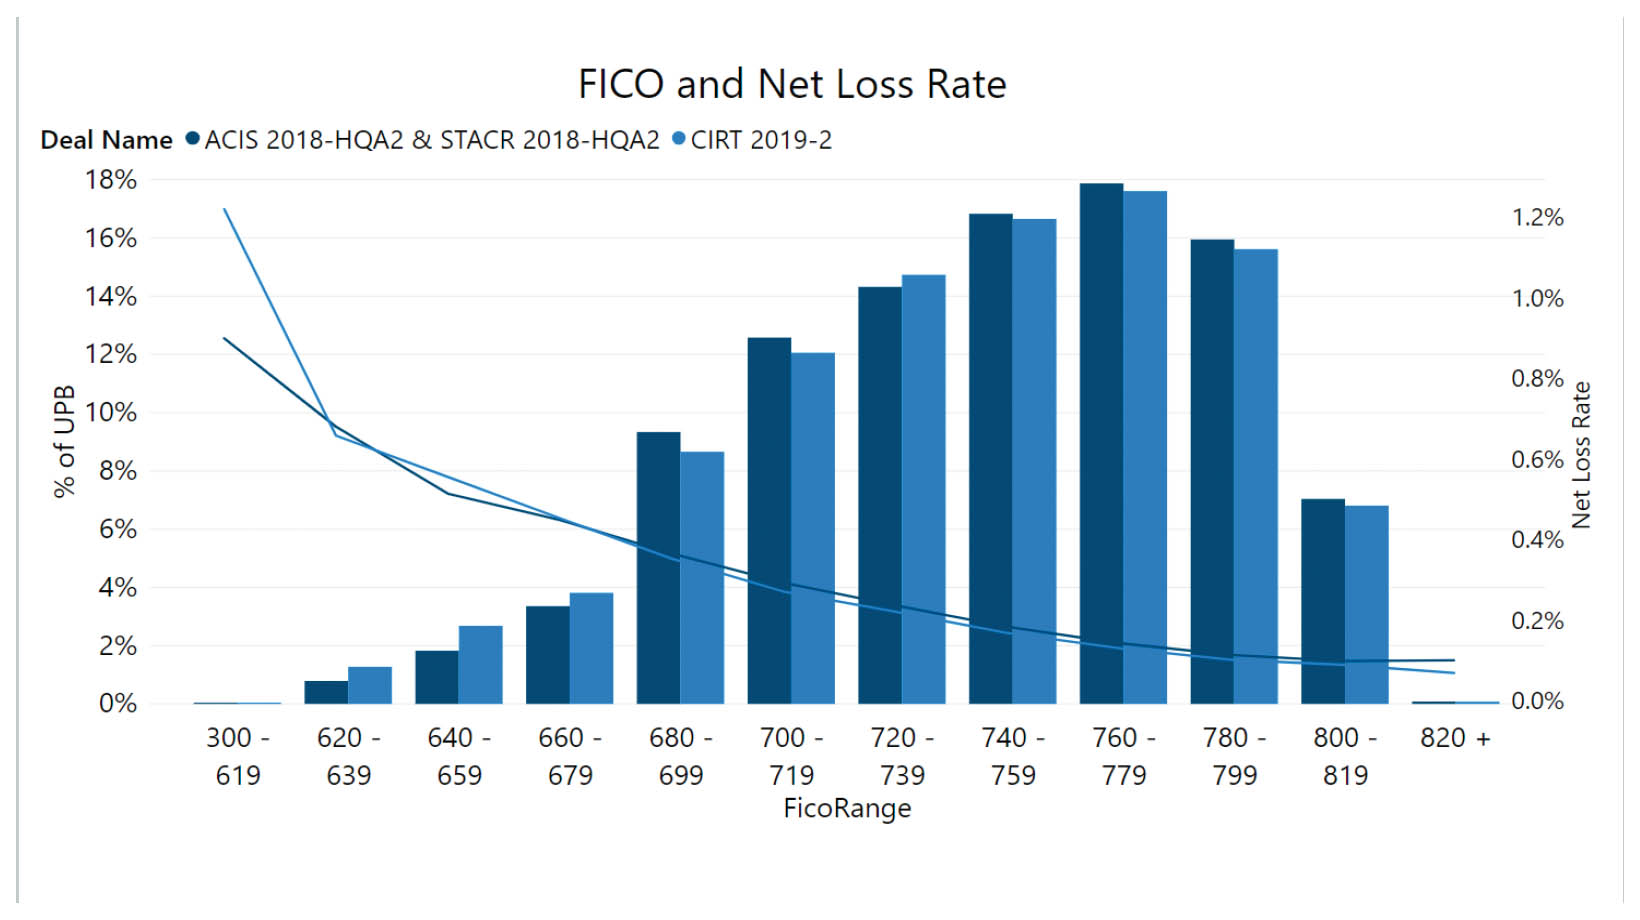 M-PIRe Securitization Software, bar graph comparing FICO and Net Loss Rate